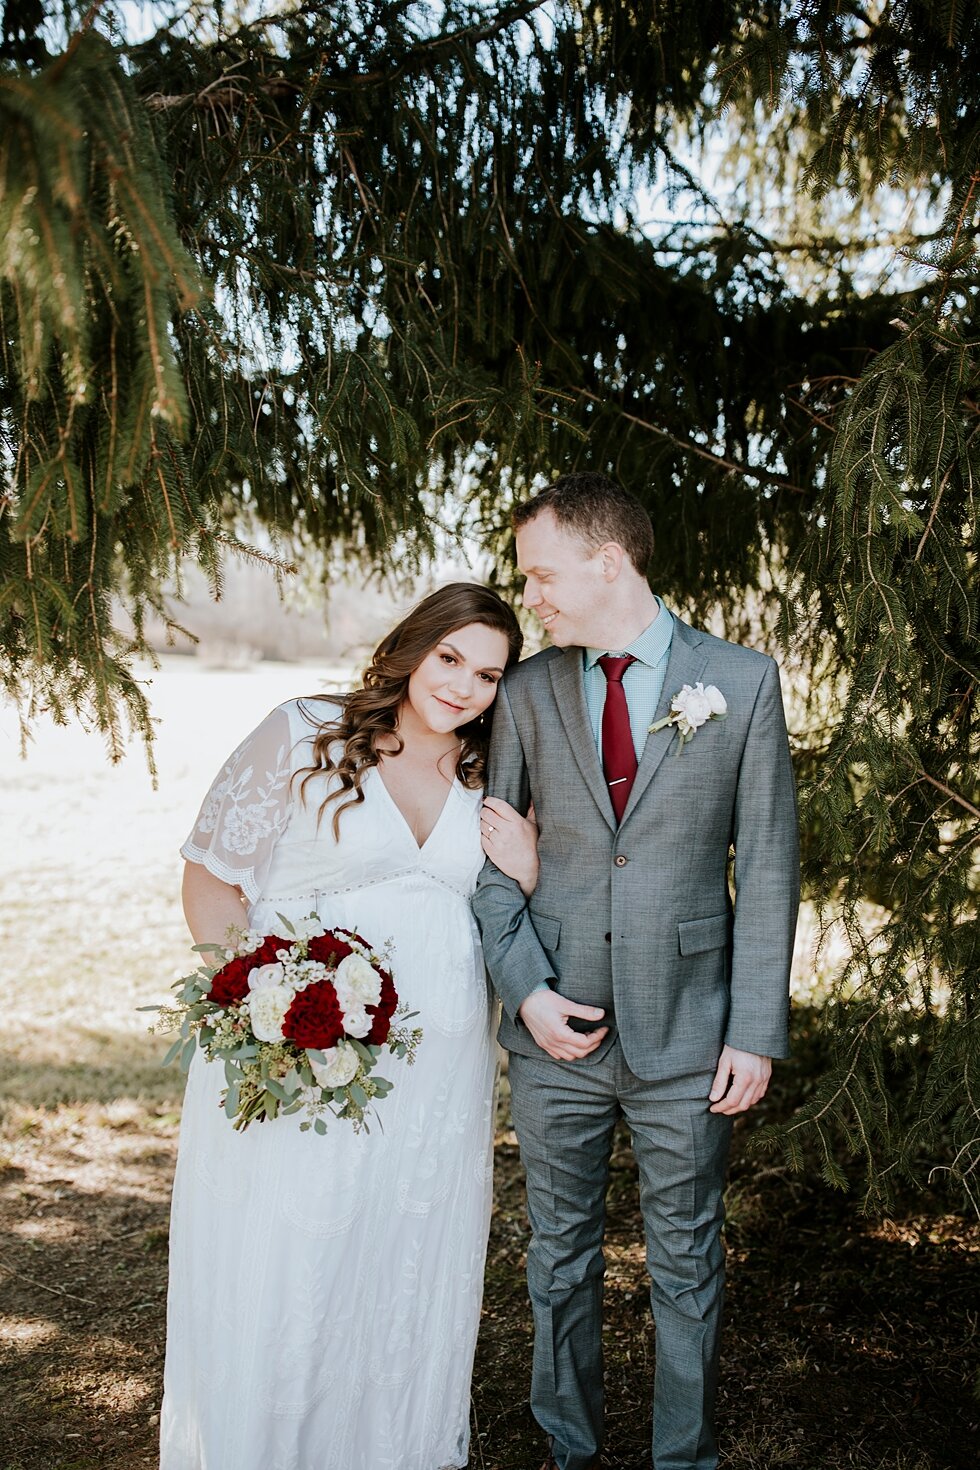  Wedding formals during a pre-wedding photo shoot with just the southern bride and groom  before the micro wedding begins. Southern wedding Indiana intimate wedding small ceremony microceremony corydon indiana professional photographer #winterwedding